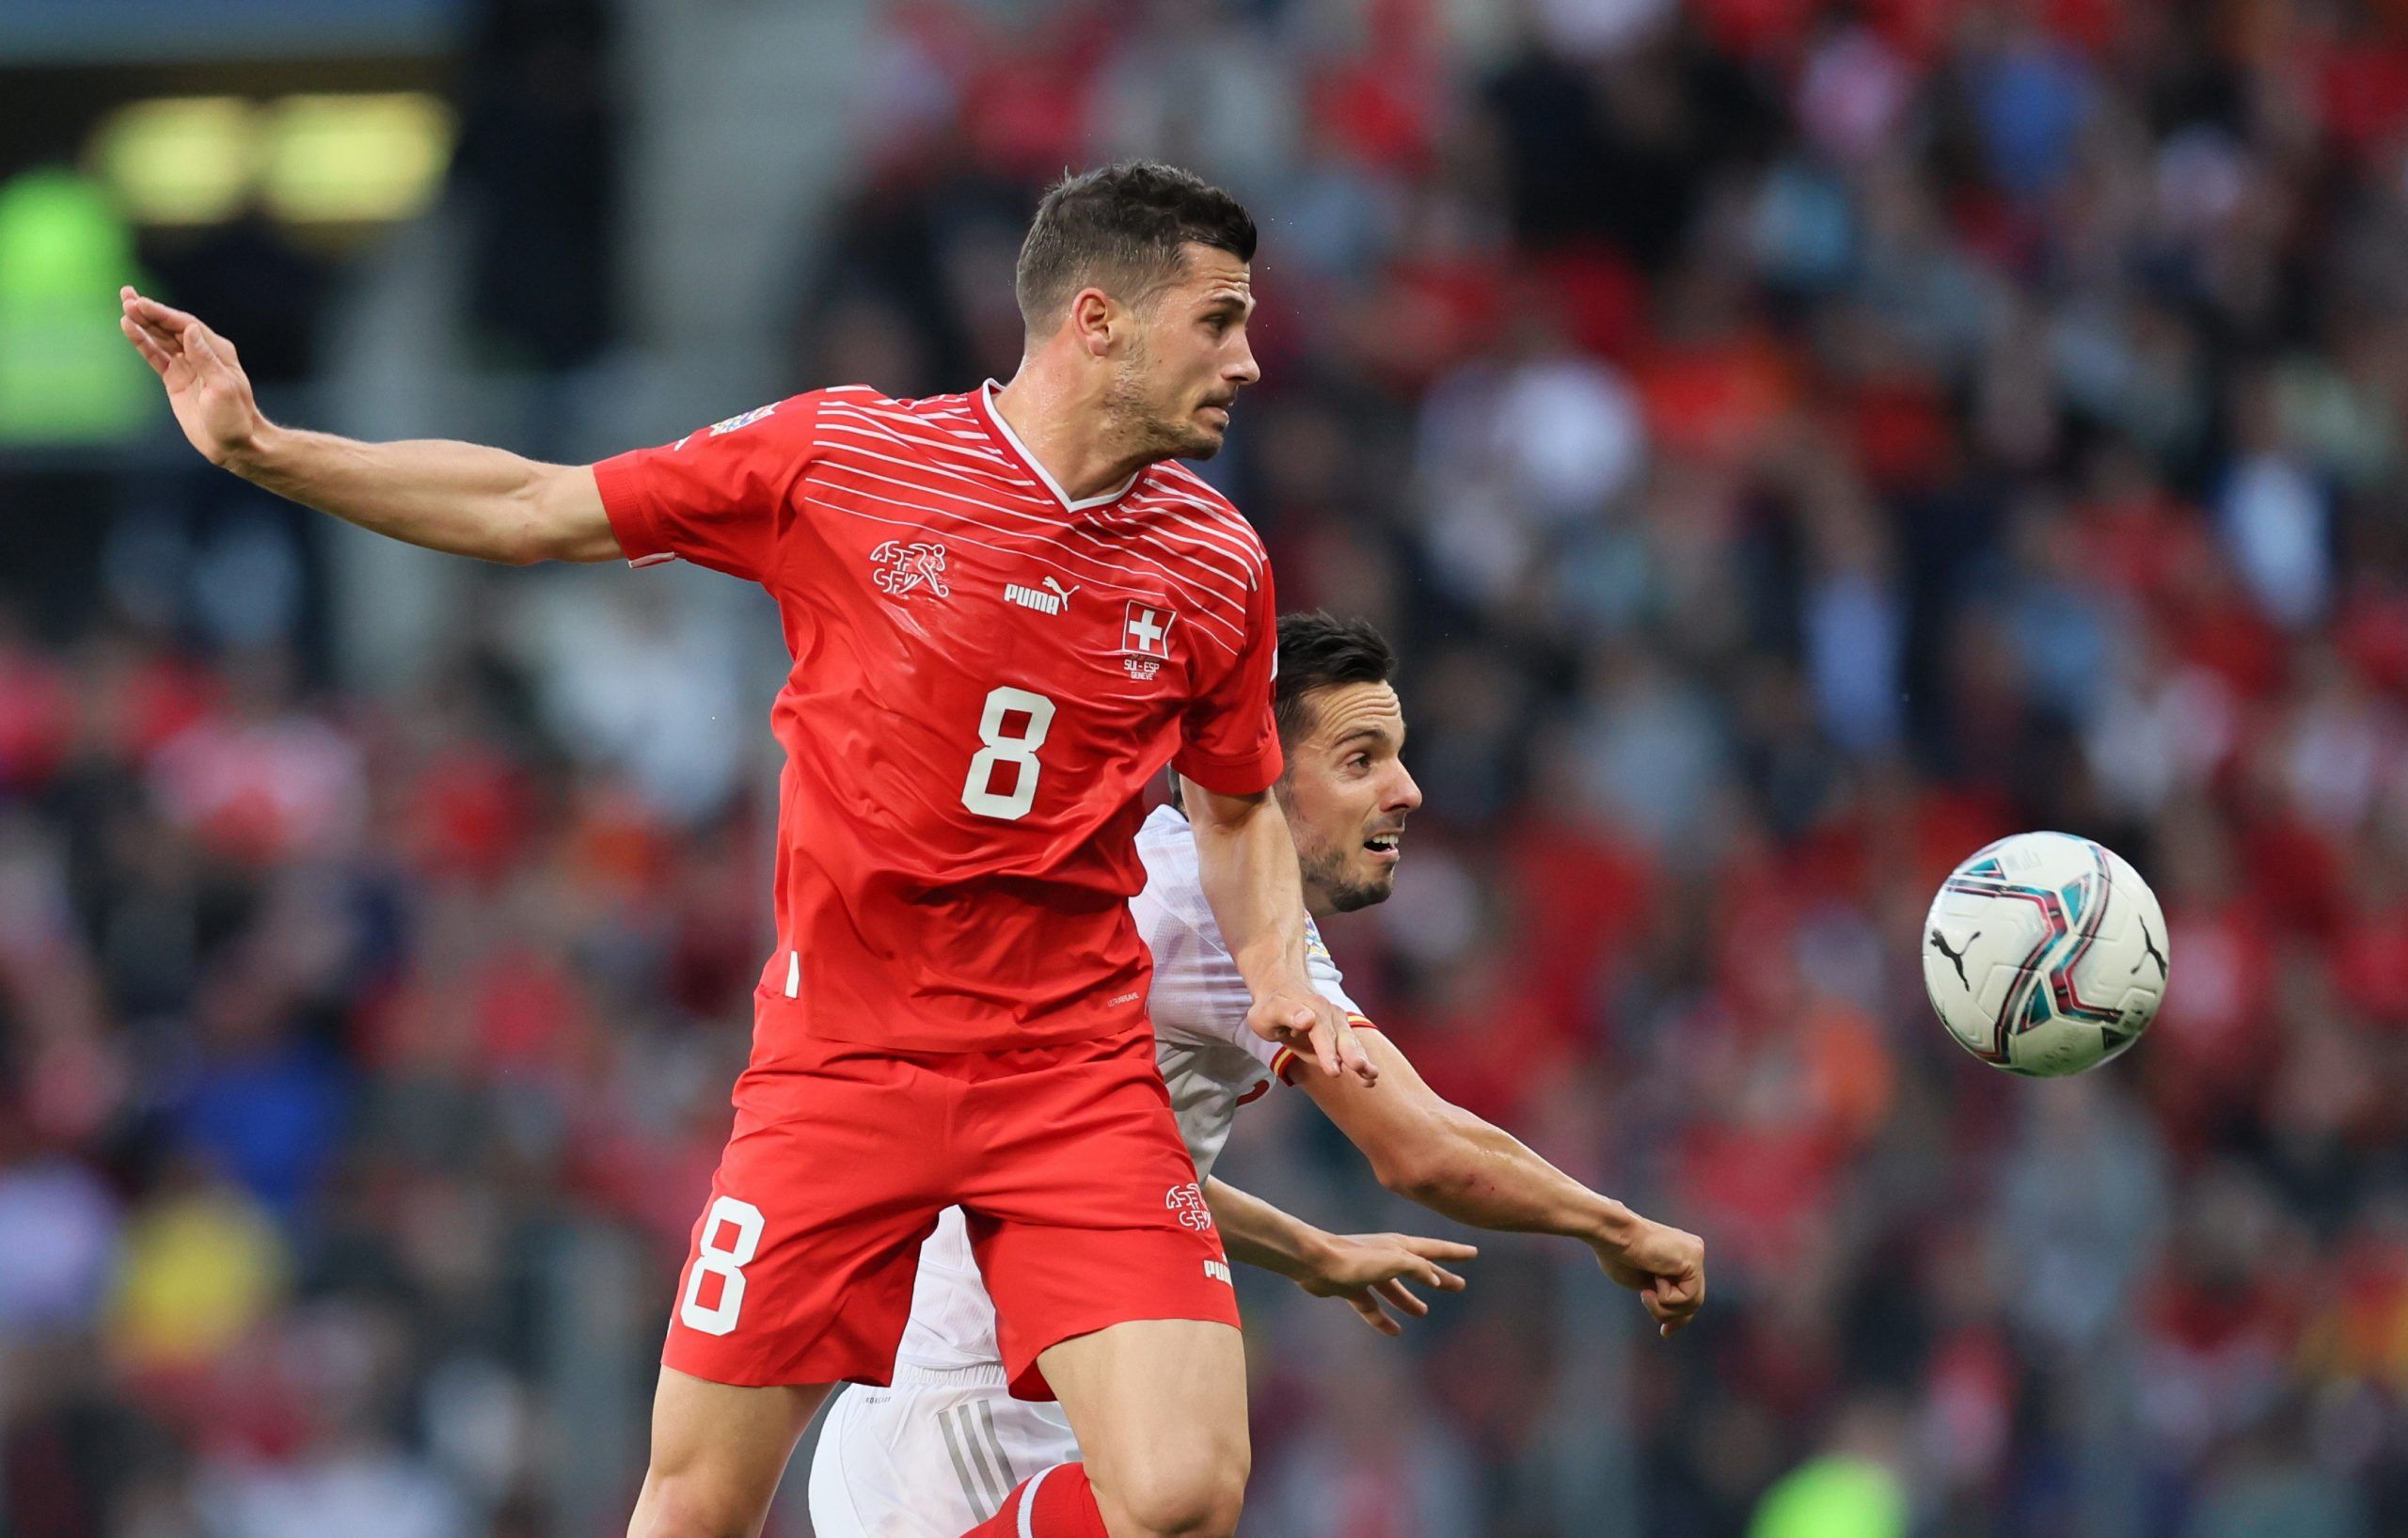 Nottingham Forest: Remo Freuler ‘in England’ ahead of Reds transfer -Nottingham Forest News